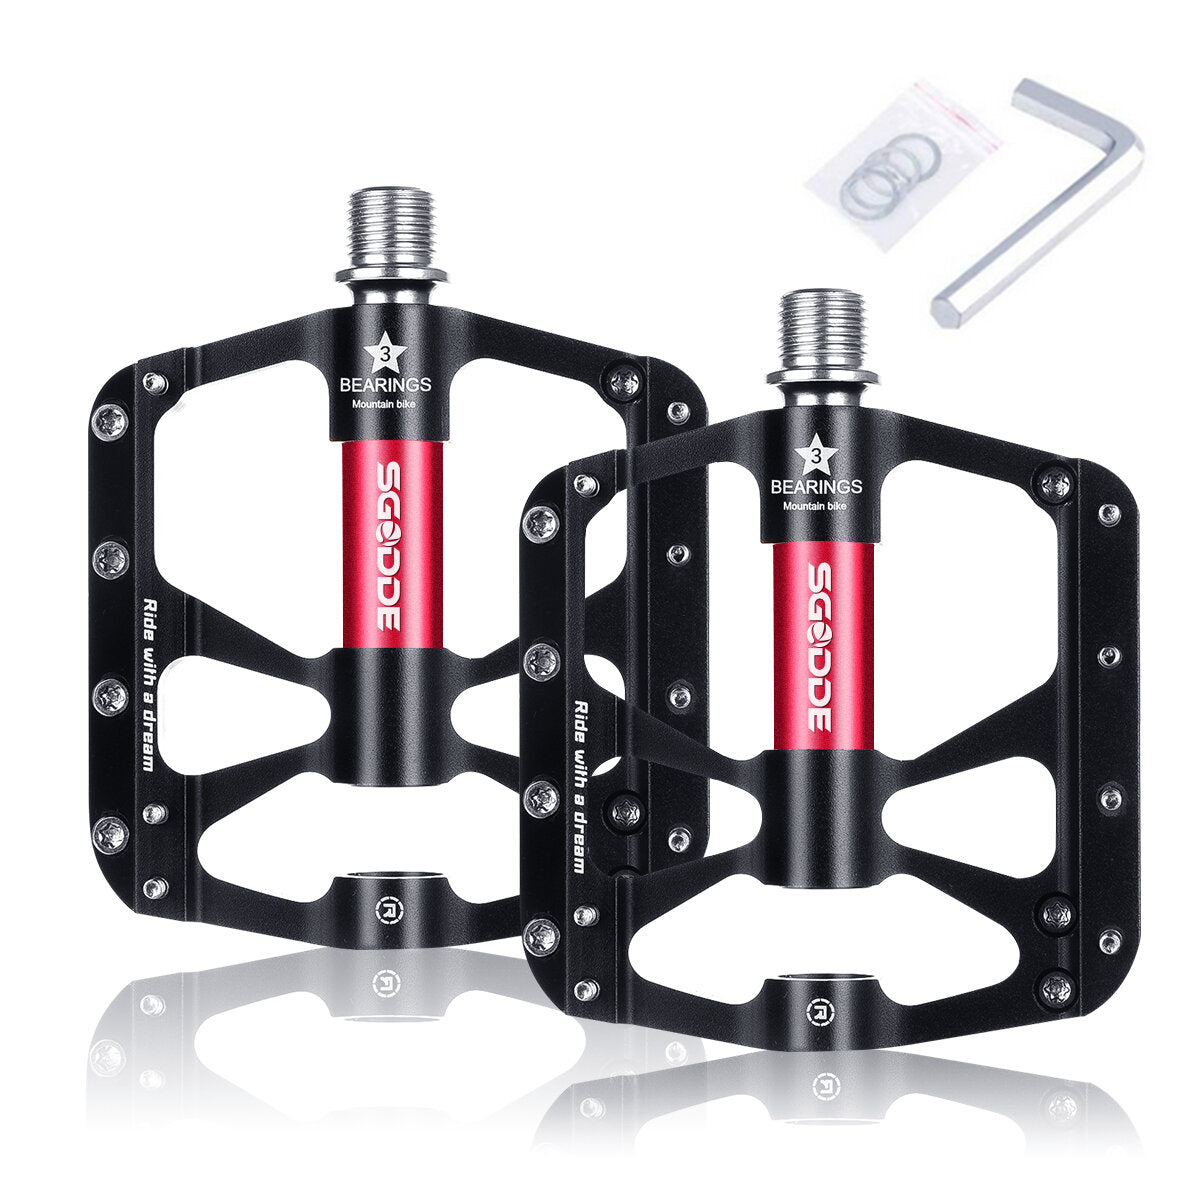 1Pair Bicycle Pedals 3 Bearings Platform Bicycle Flat Non-Slip Outdoor Cycling Flat Pedals